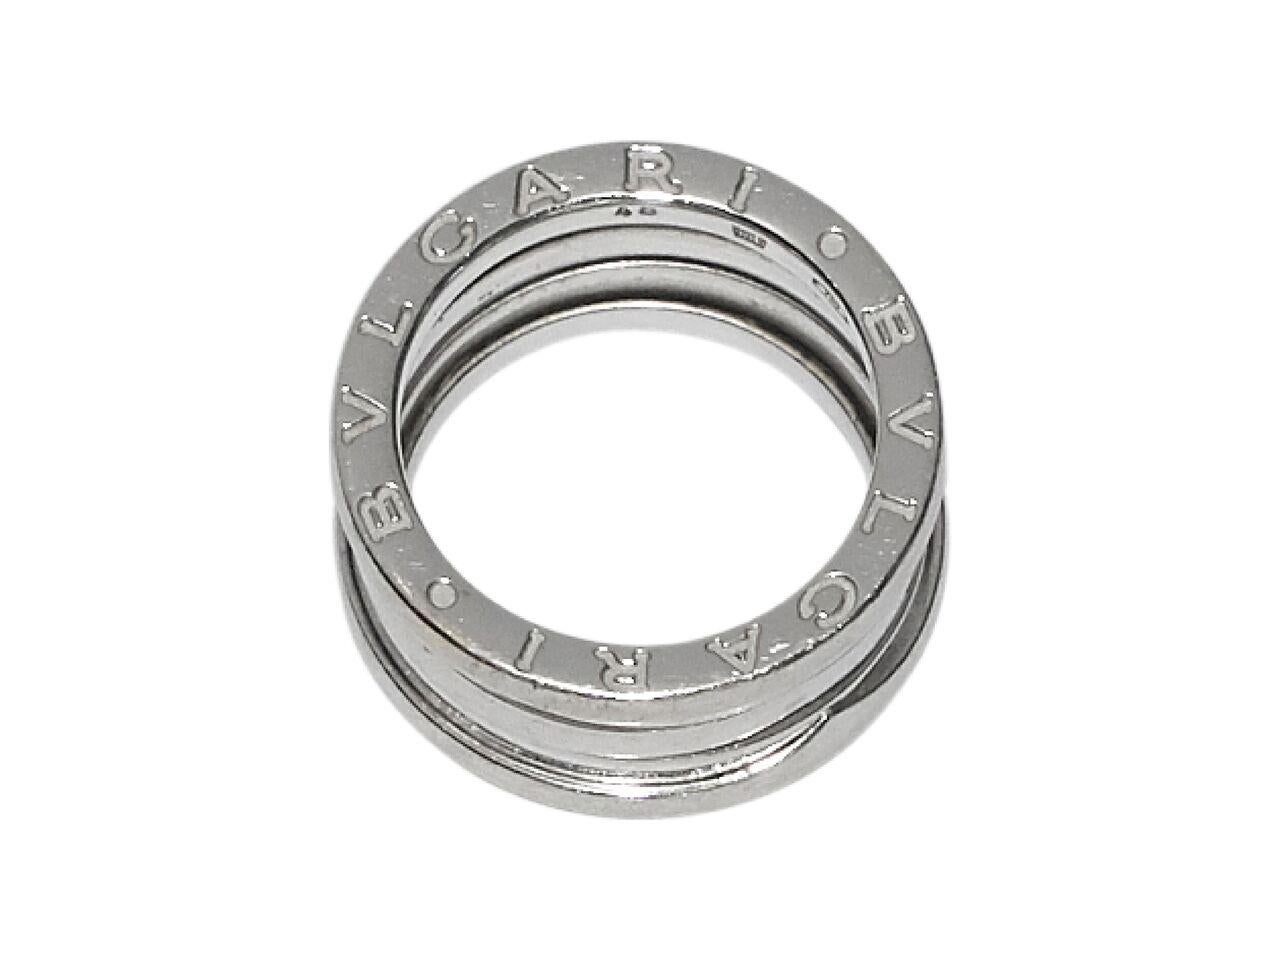 Product details:  18K white gold B.zero1 ring by Bulgari.  Engraved logo design. Size 3.75.
Condition: Pre-owned. Very good. 
Est. Retail $ 2,500.00